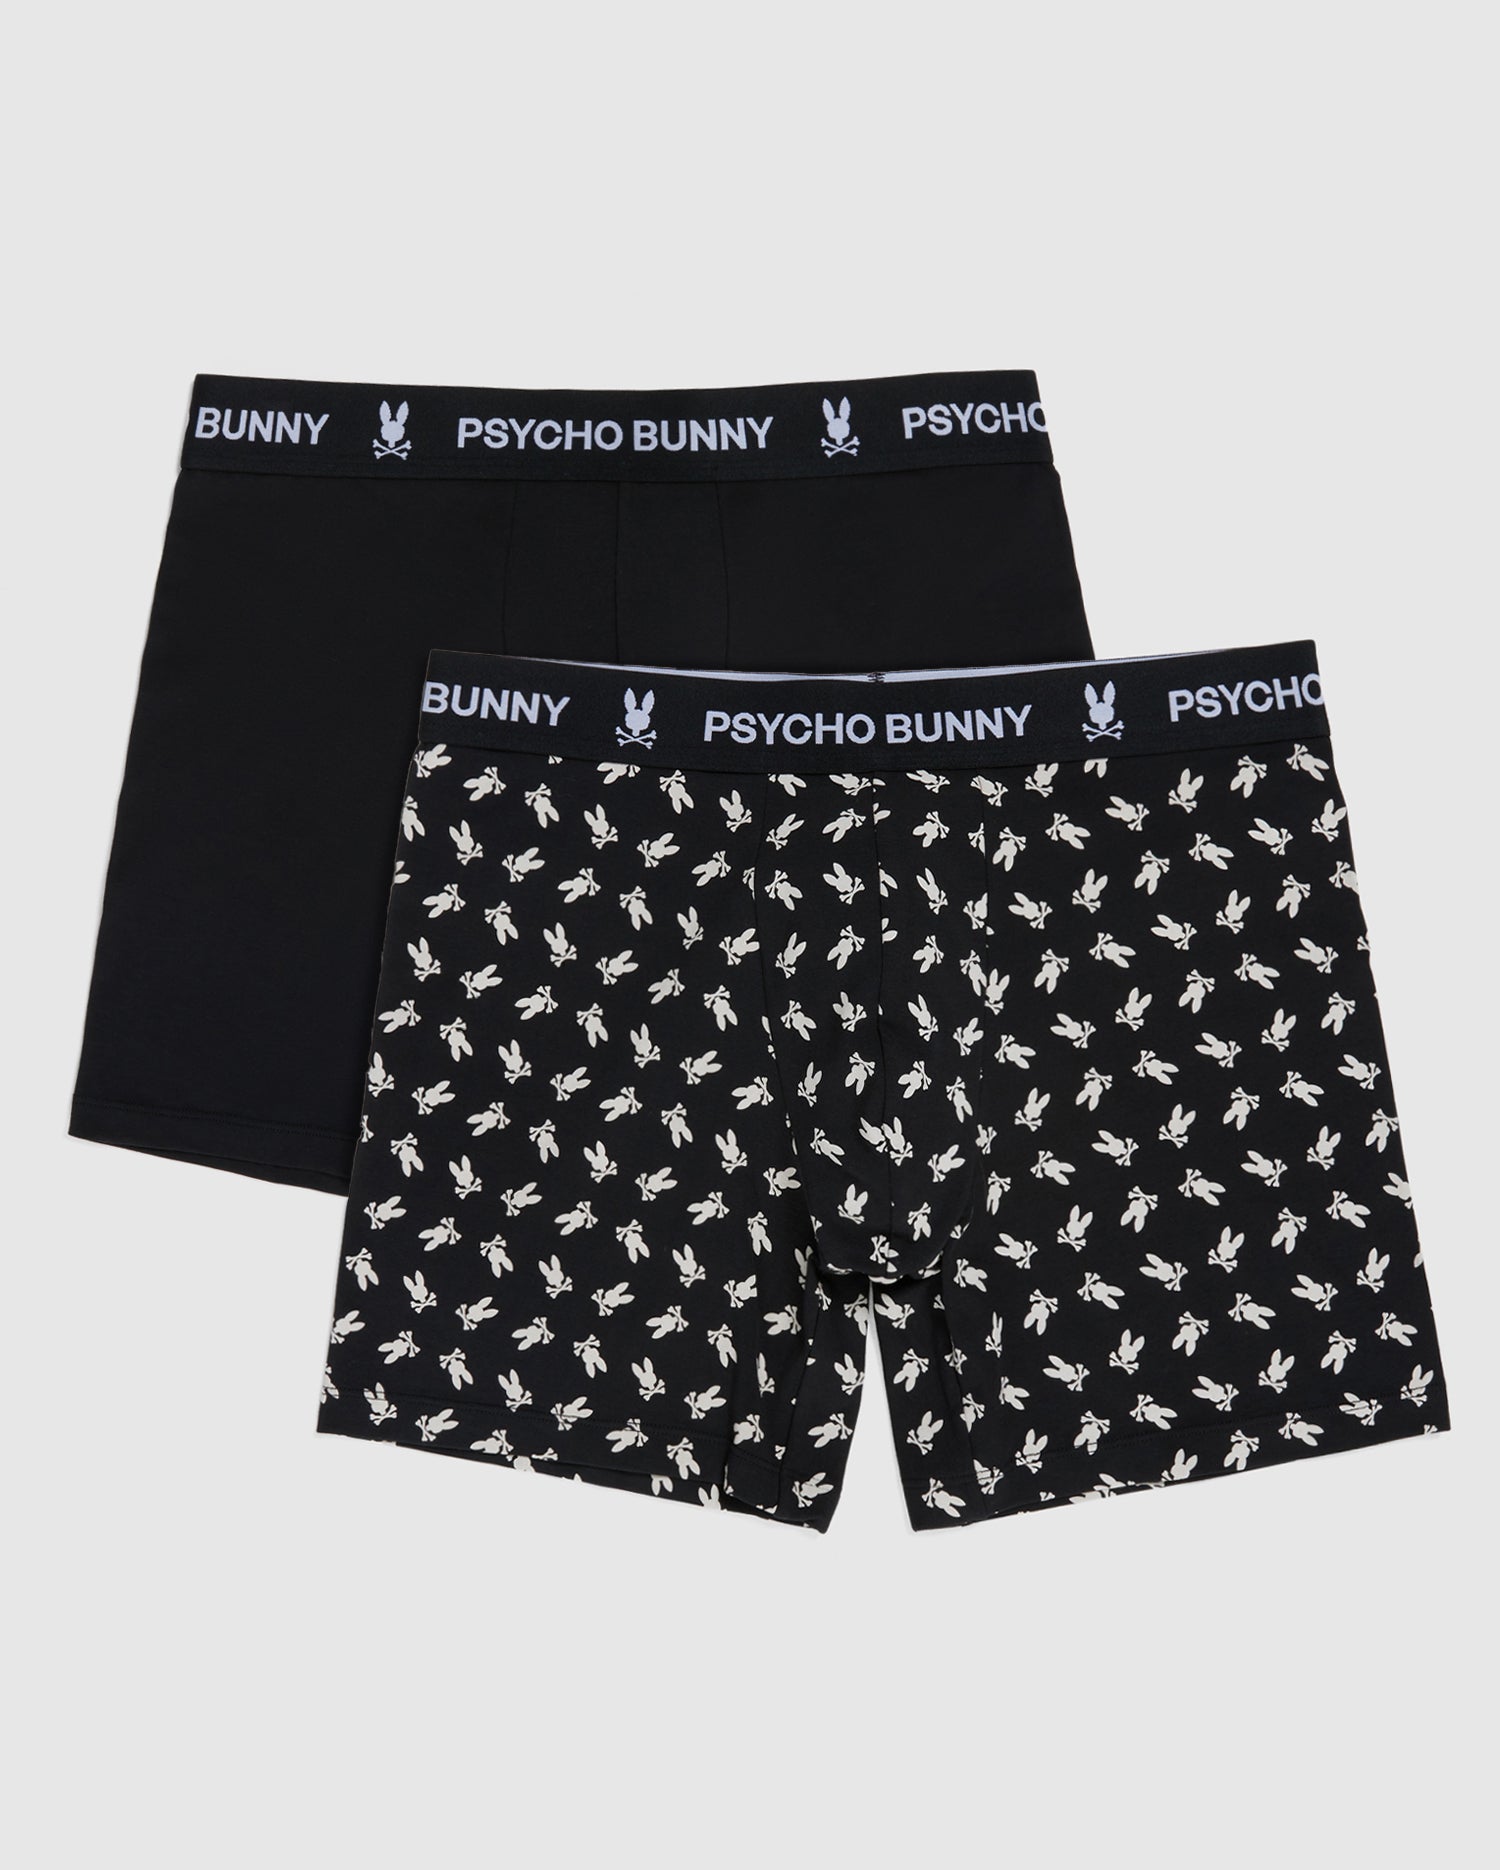 Psycho Bunny 2-Pack Boxer Brief Black LG at  Men's Clothing store